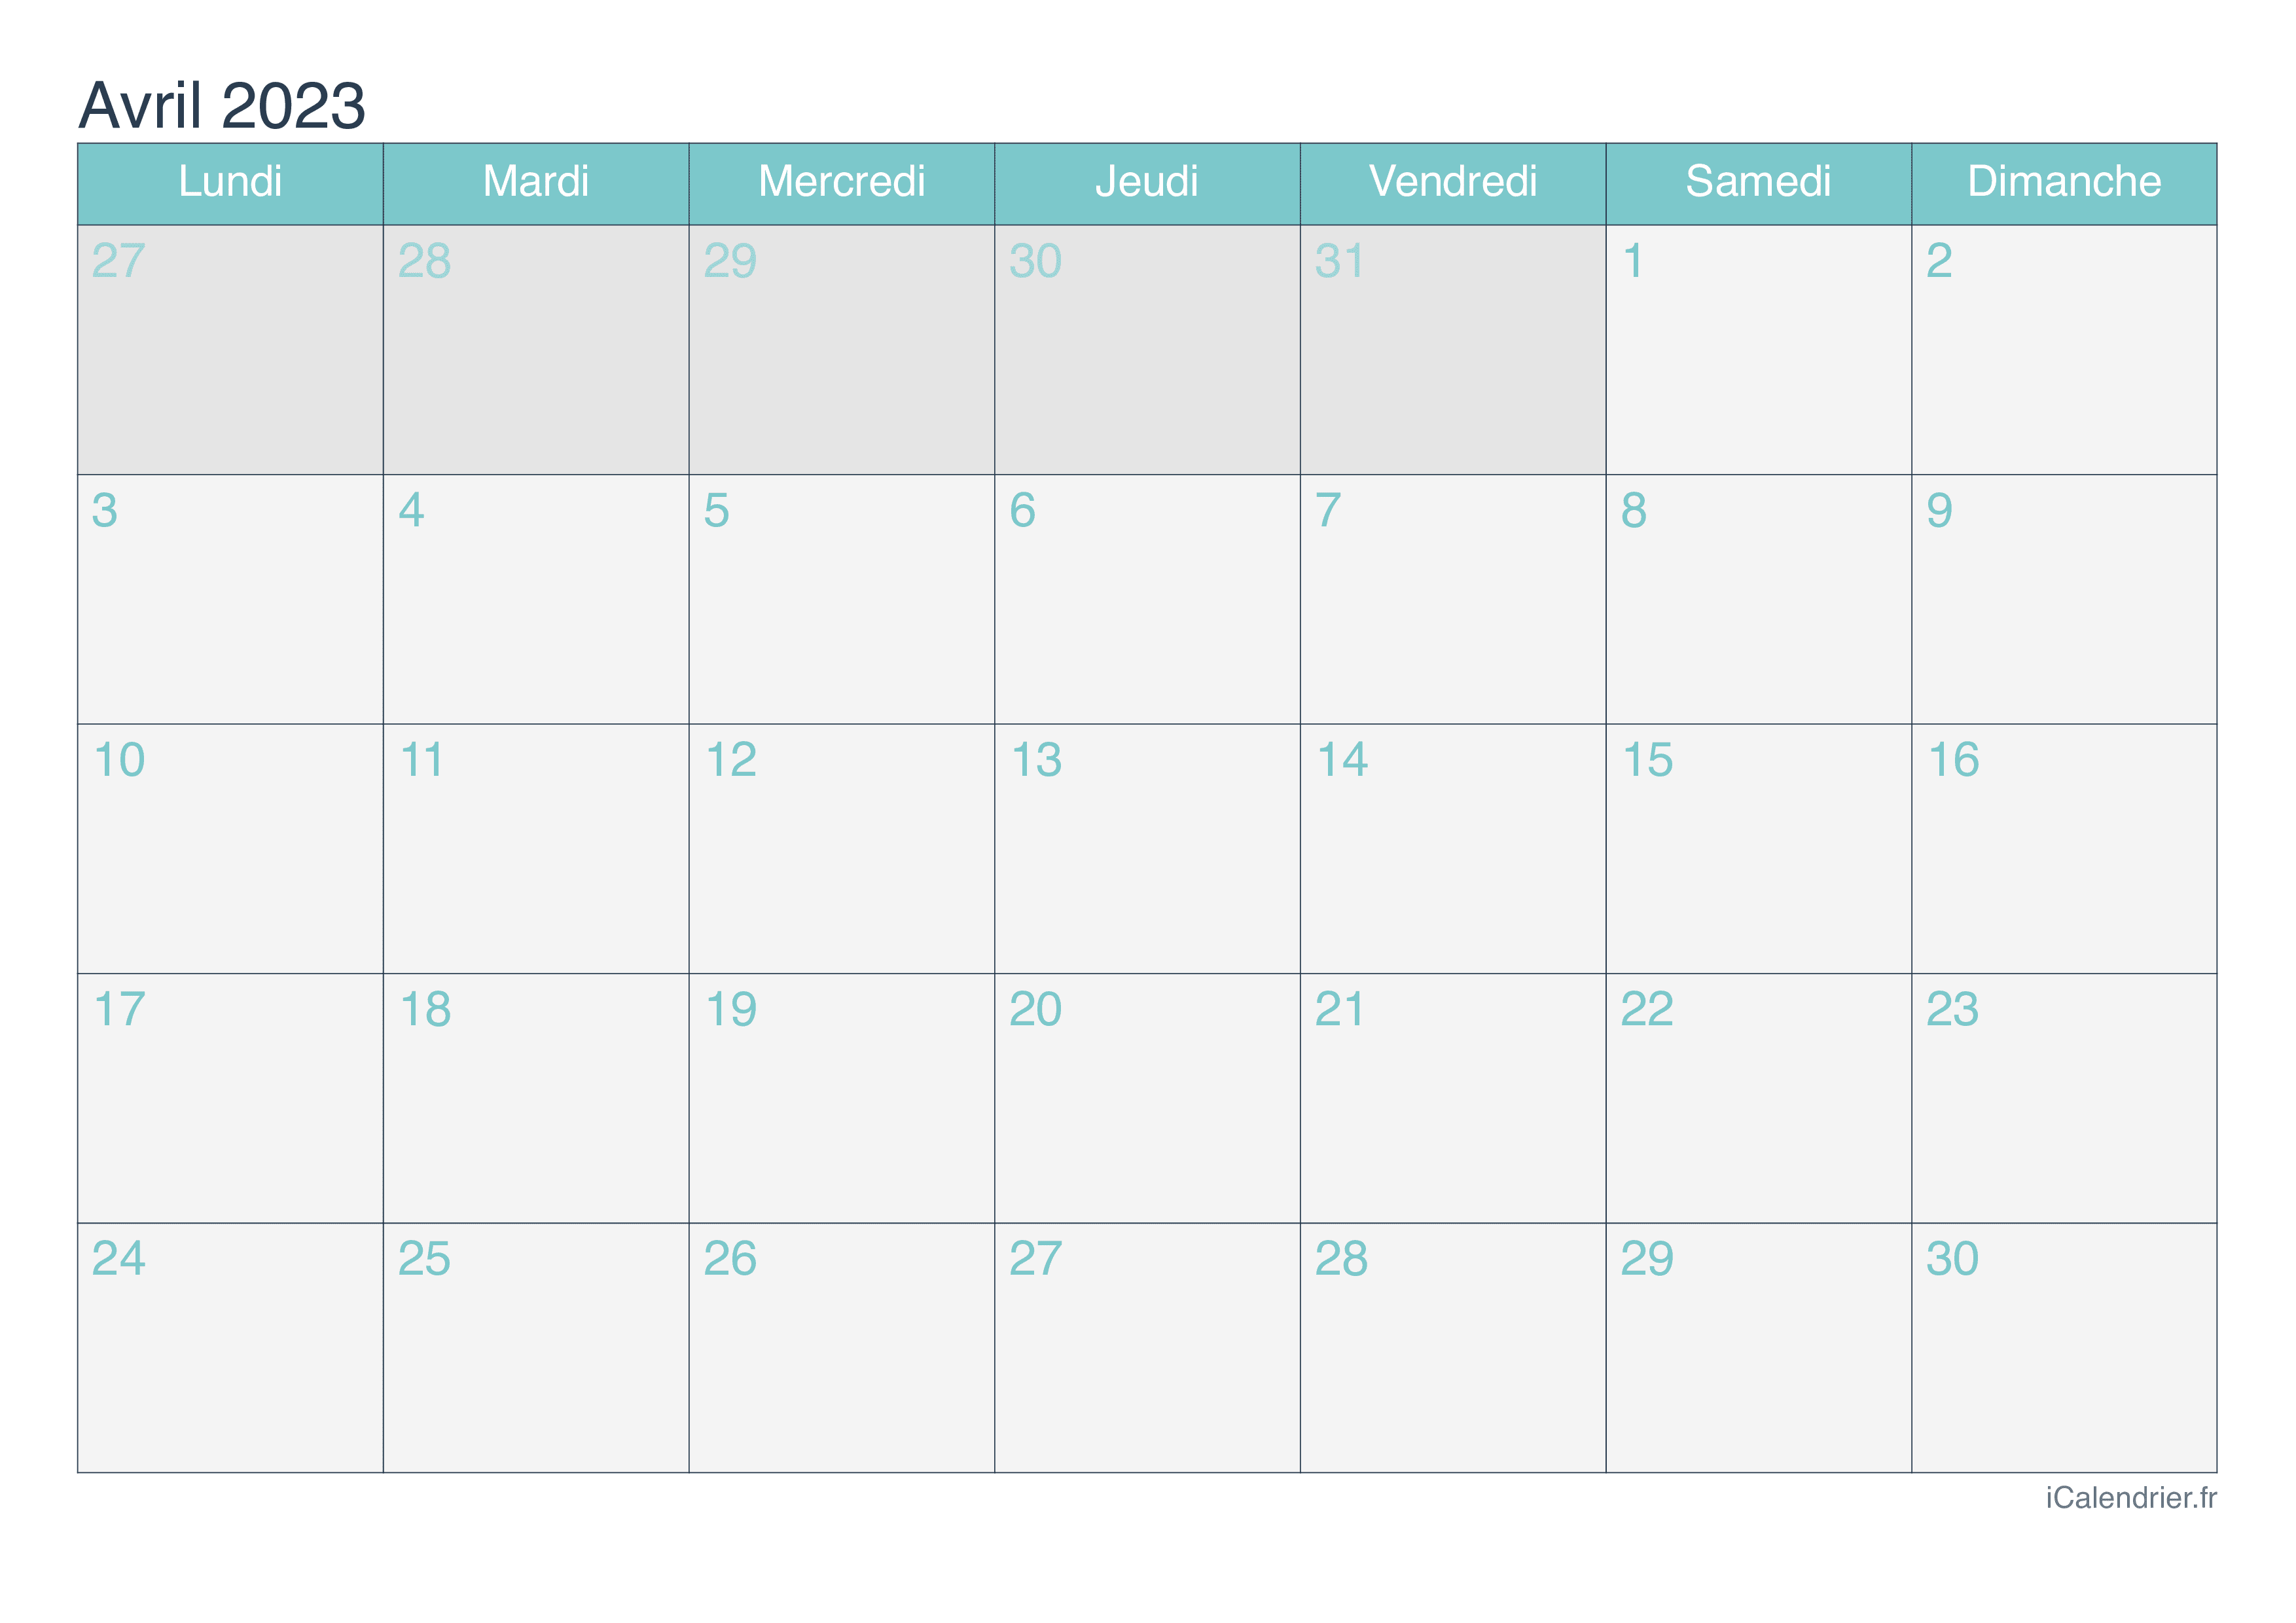 Calendrier d'avril 2023 - Turquoise